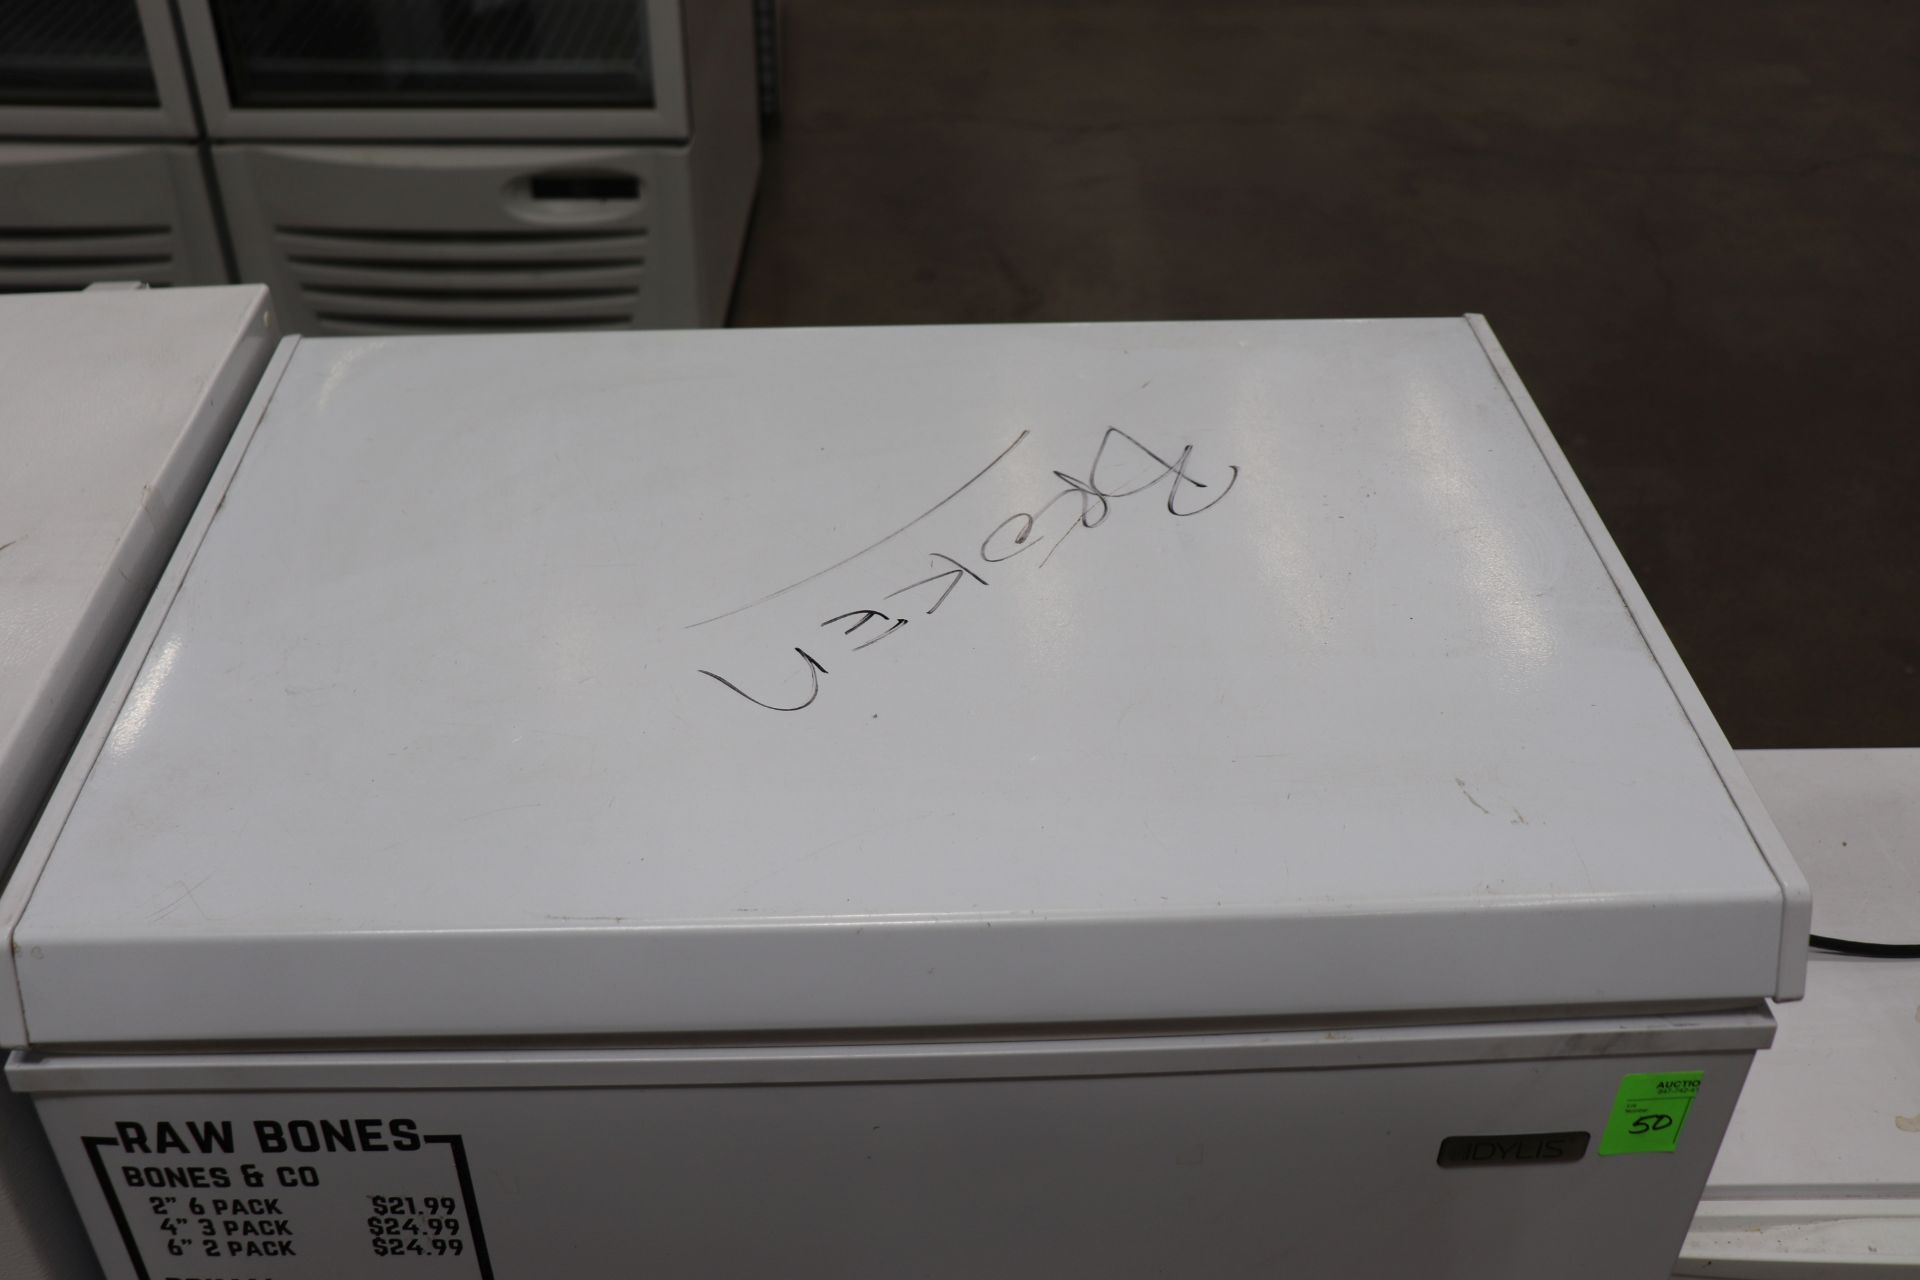 Idylis Chest Freezer, 5 cubit foot capacity, Model IF50CM23NW, Serial LM950037, 39" x 22" x 33" - Image 2 of 6